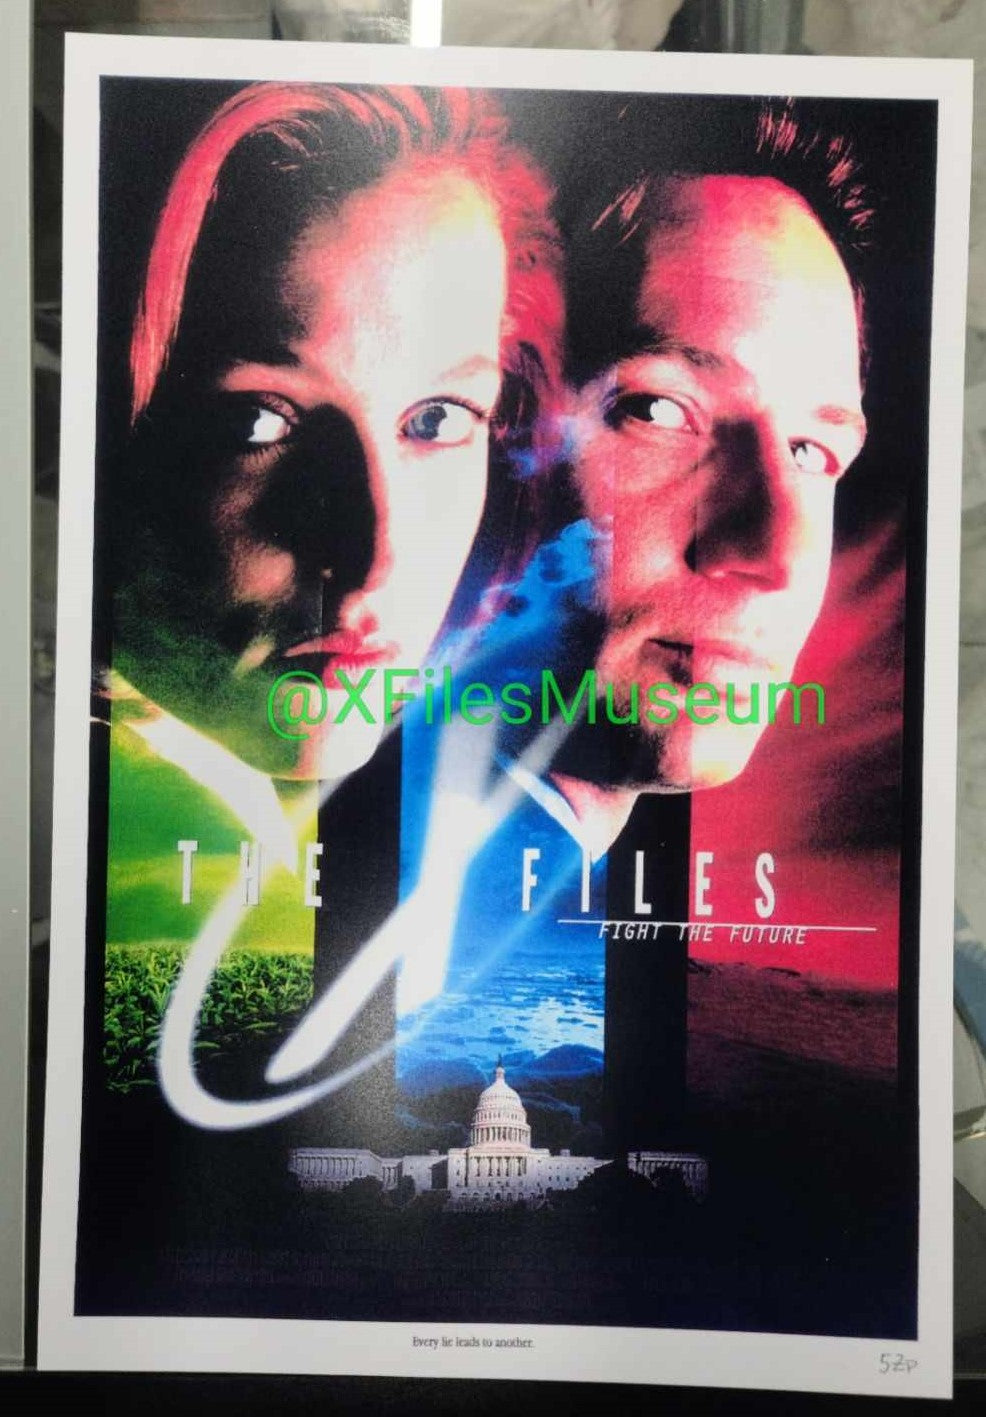 The X-Files FIGHT THE FUTURE Concept Art Print 13" x 19" Poster Print - 49